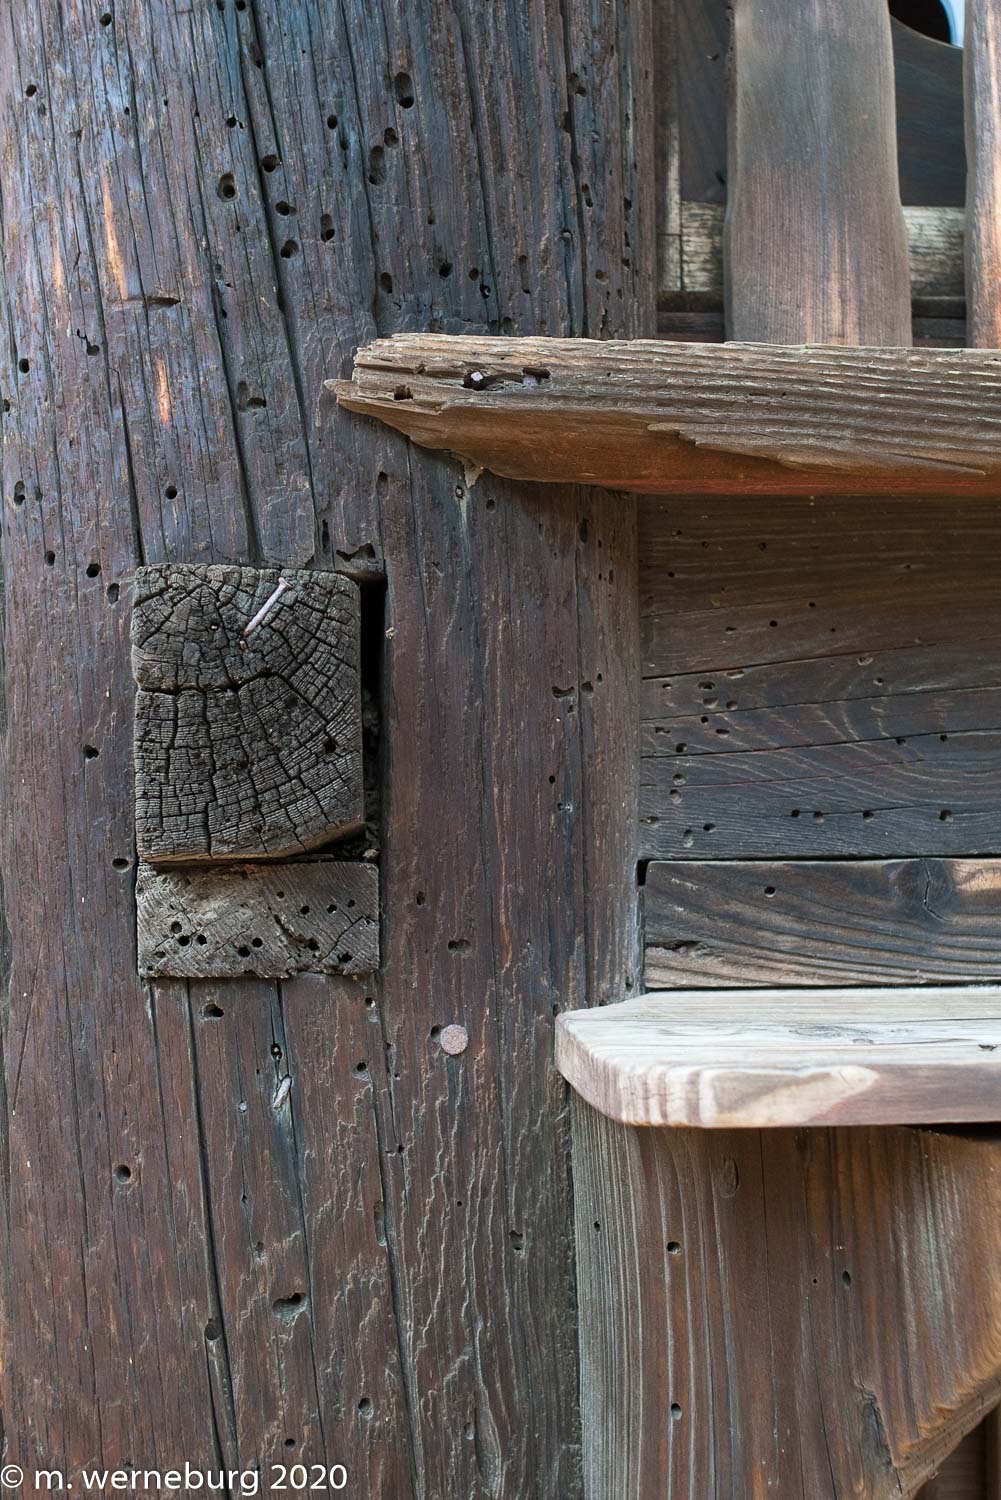 nails and termites make holes in old wood